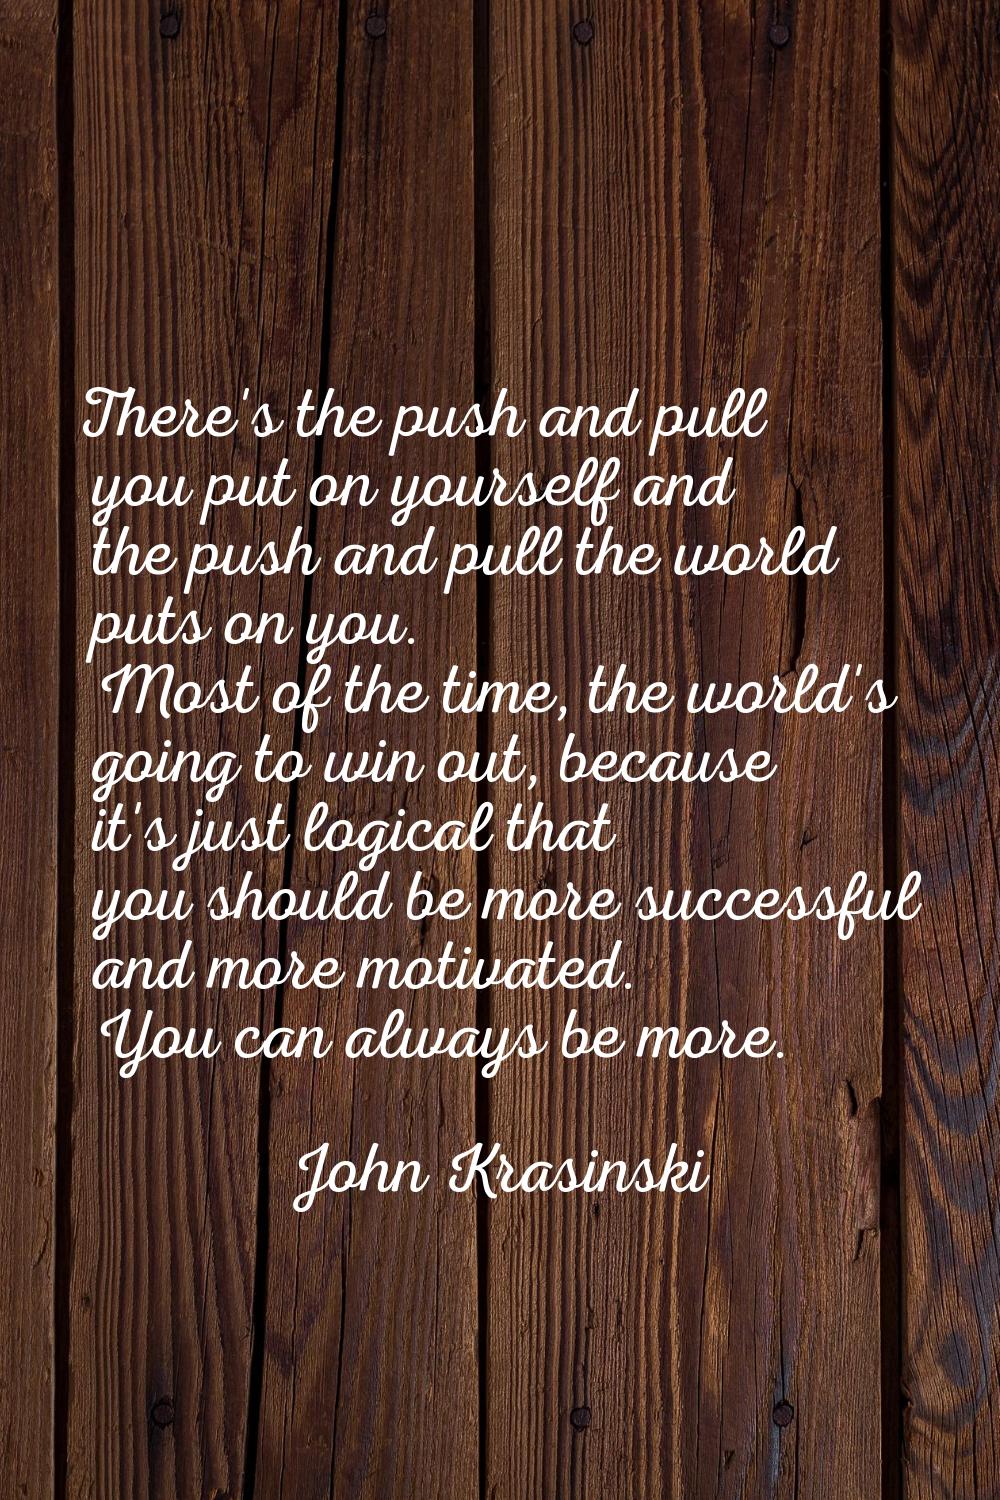 There's the push and pull you put on yourself and the push and pull the world puts on you. Most of 